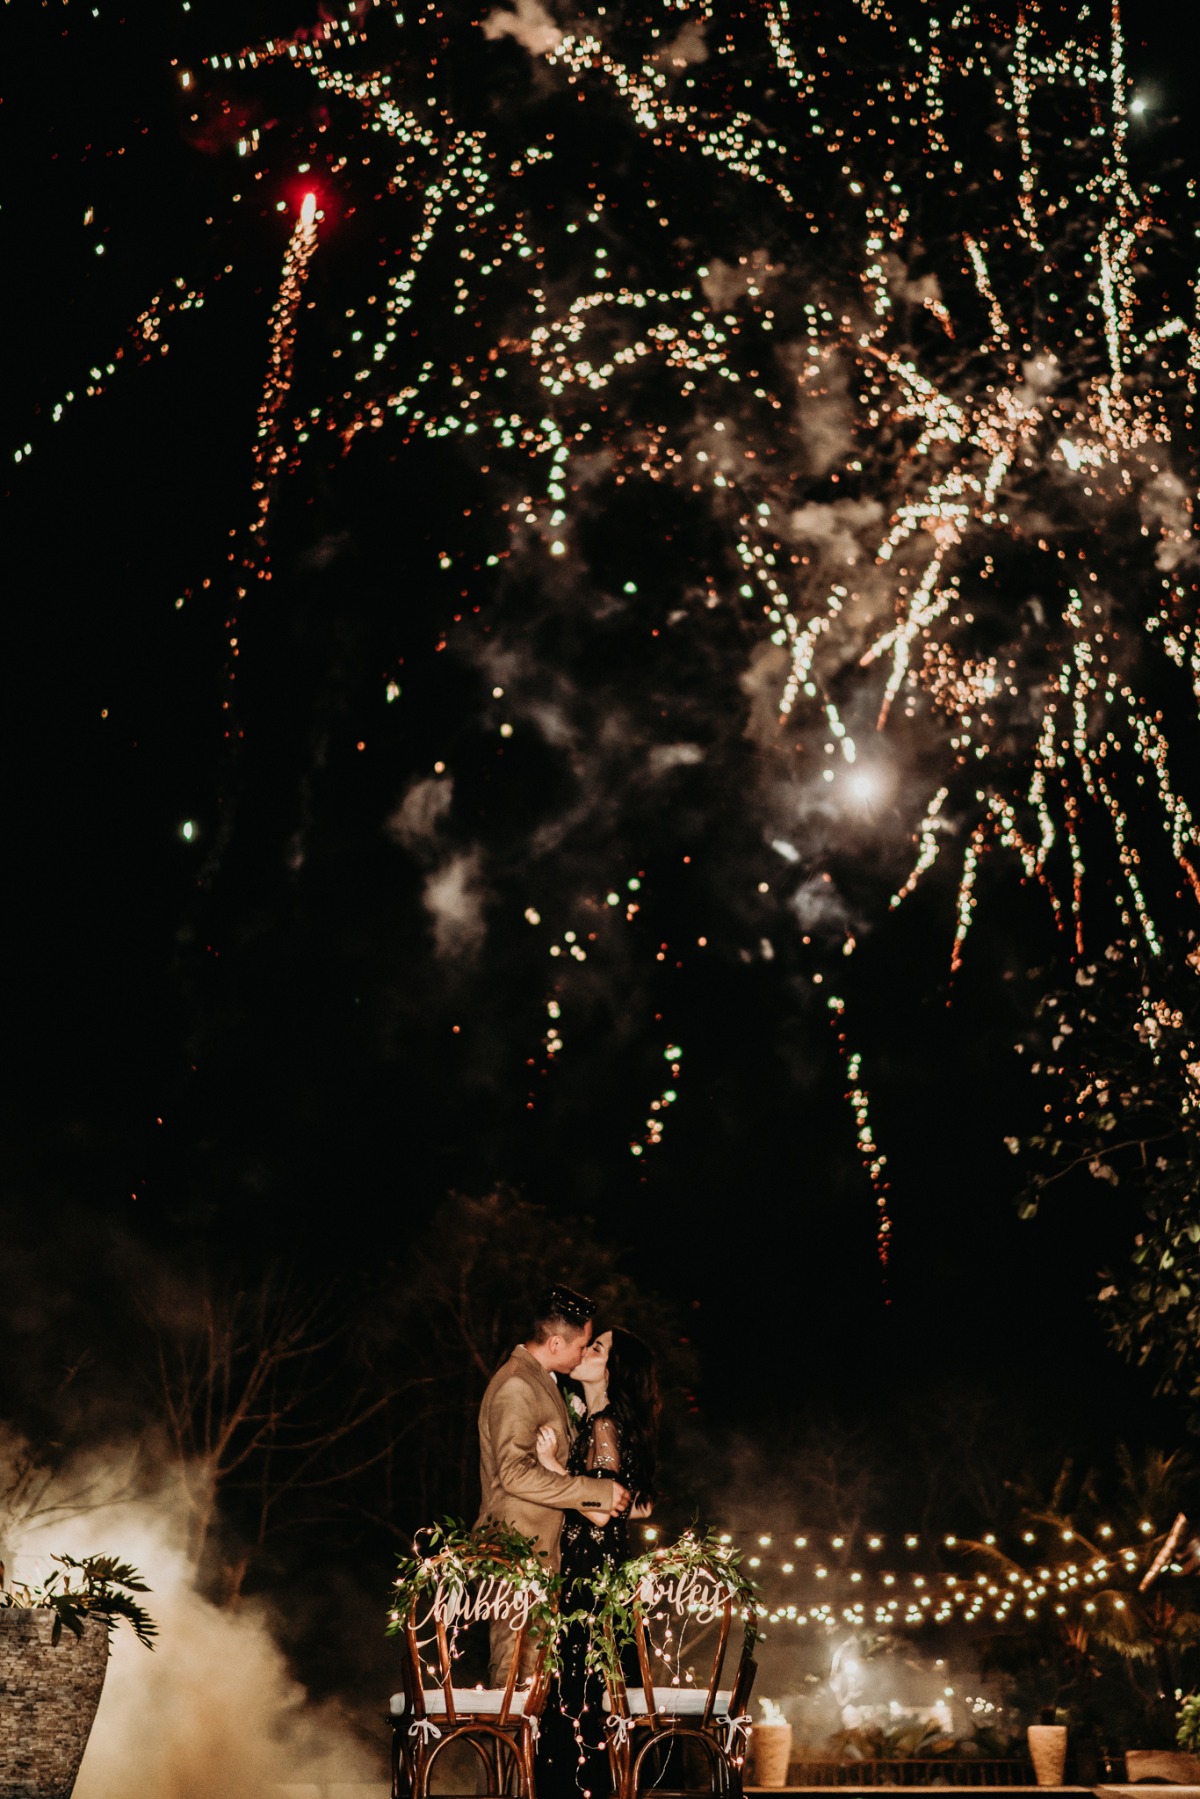 Fireworks at the end of wedding